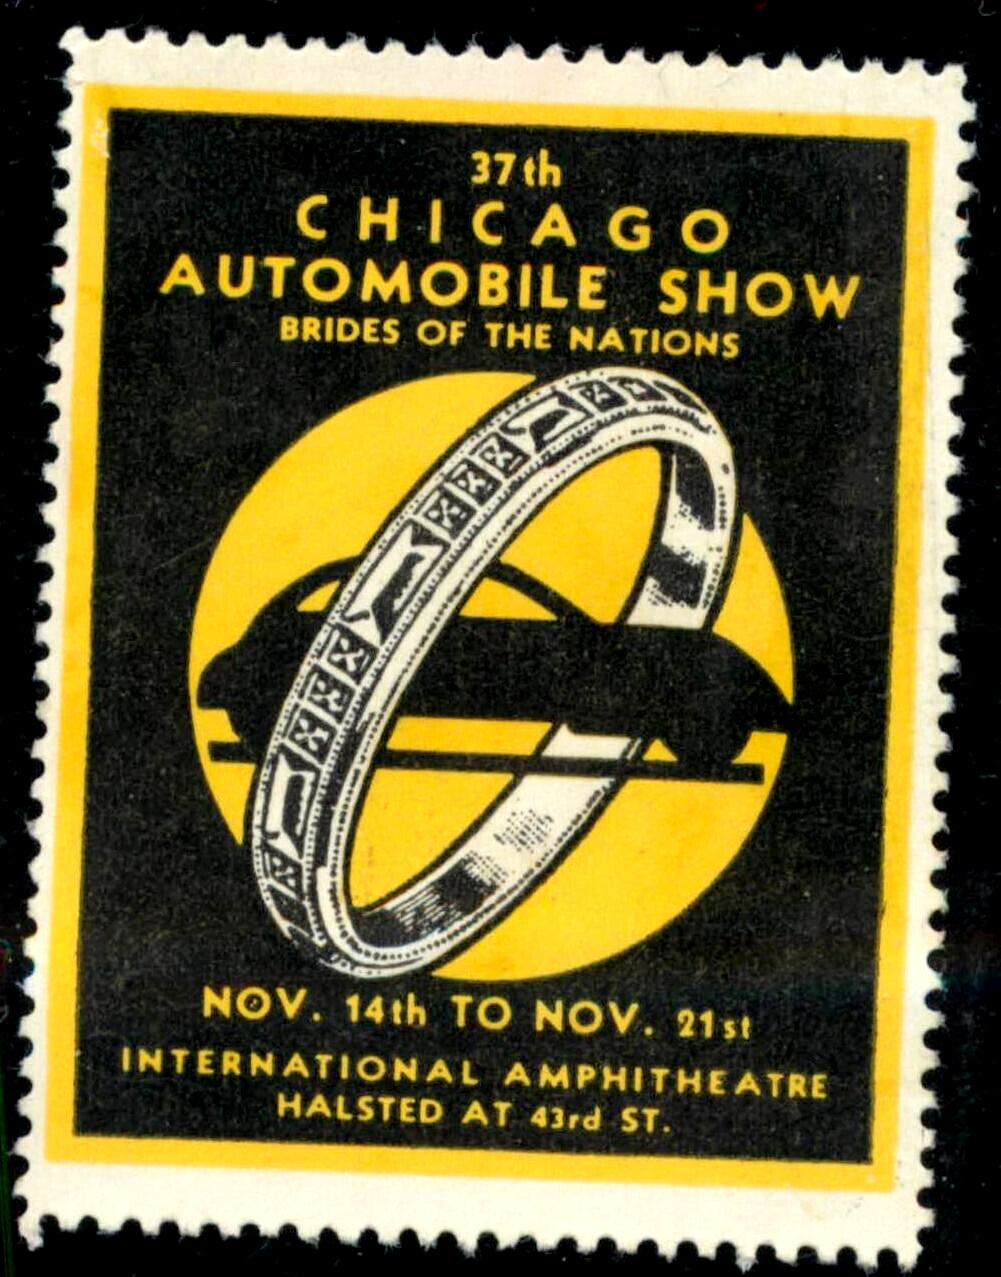 The 1937 CHICAGO AUTOMOBILE Show ~ Great Old Poster Stamp / Cinderella